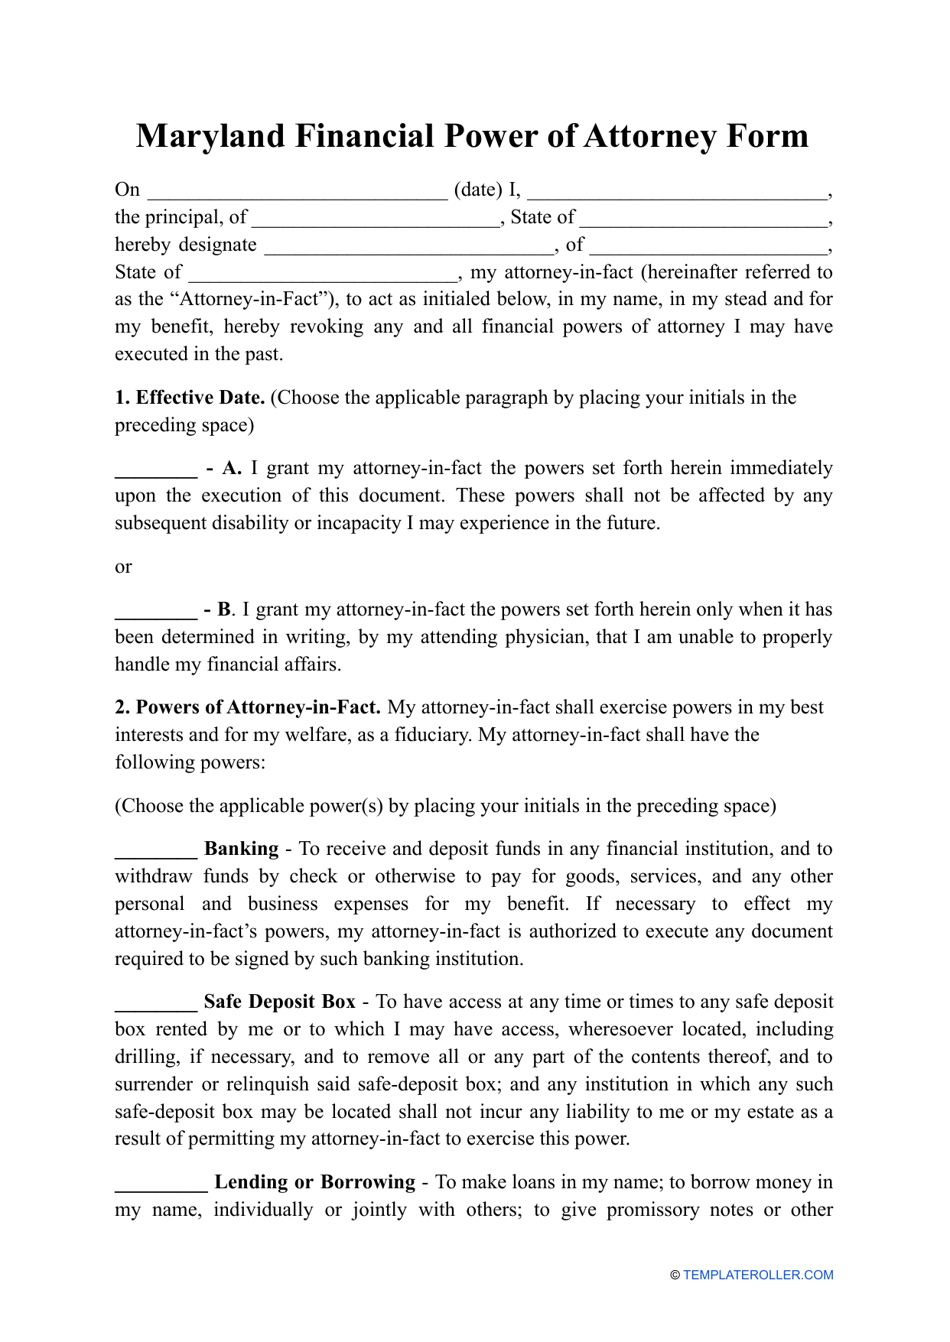 Financial Power of Attorney Form - Maryland, Page 1